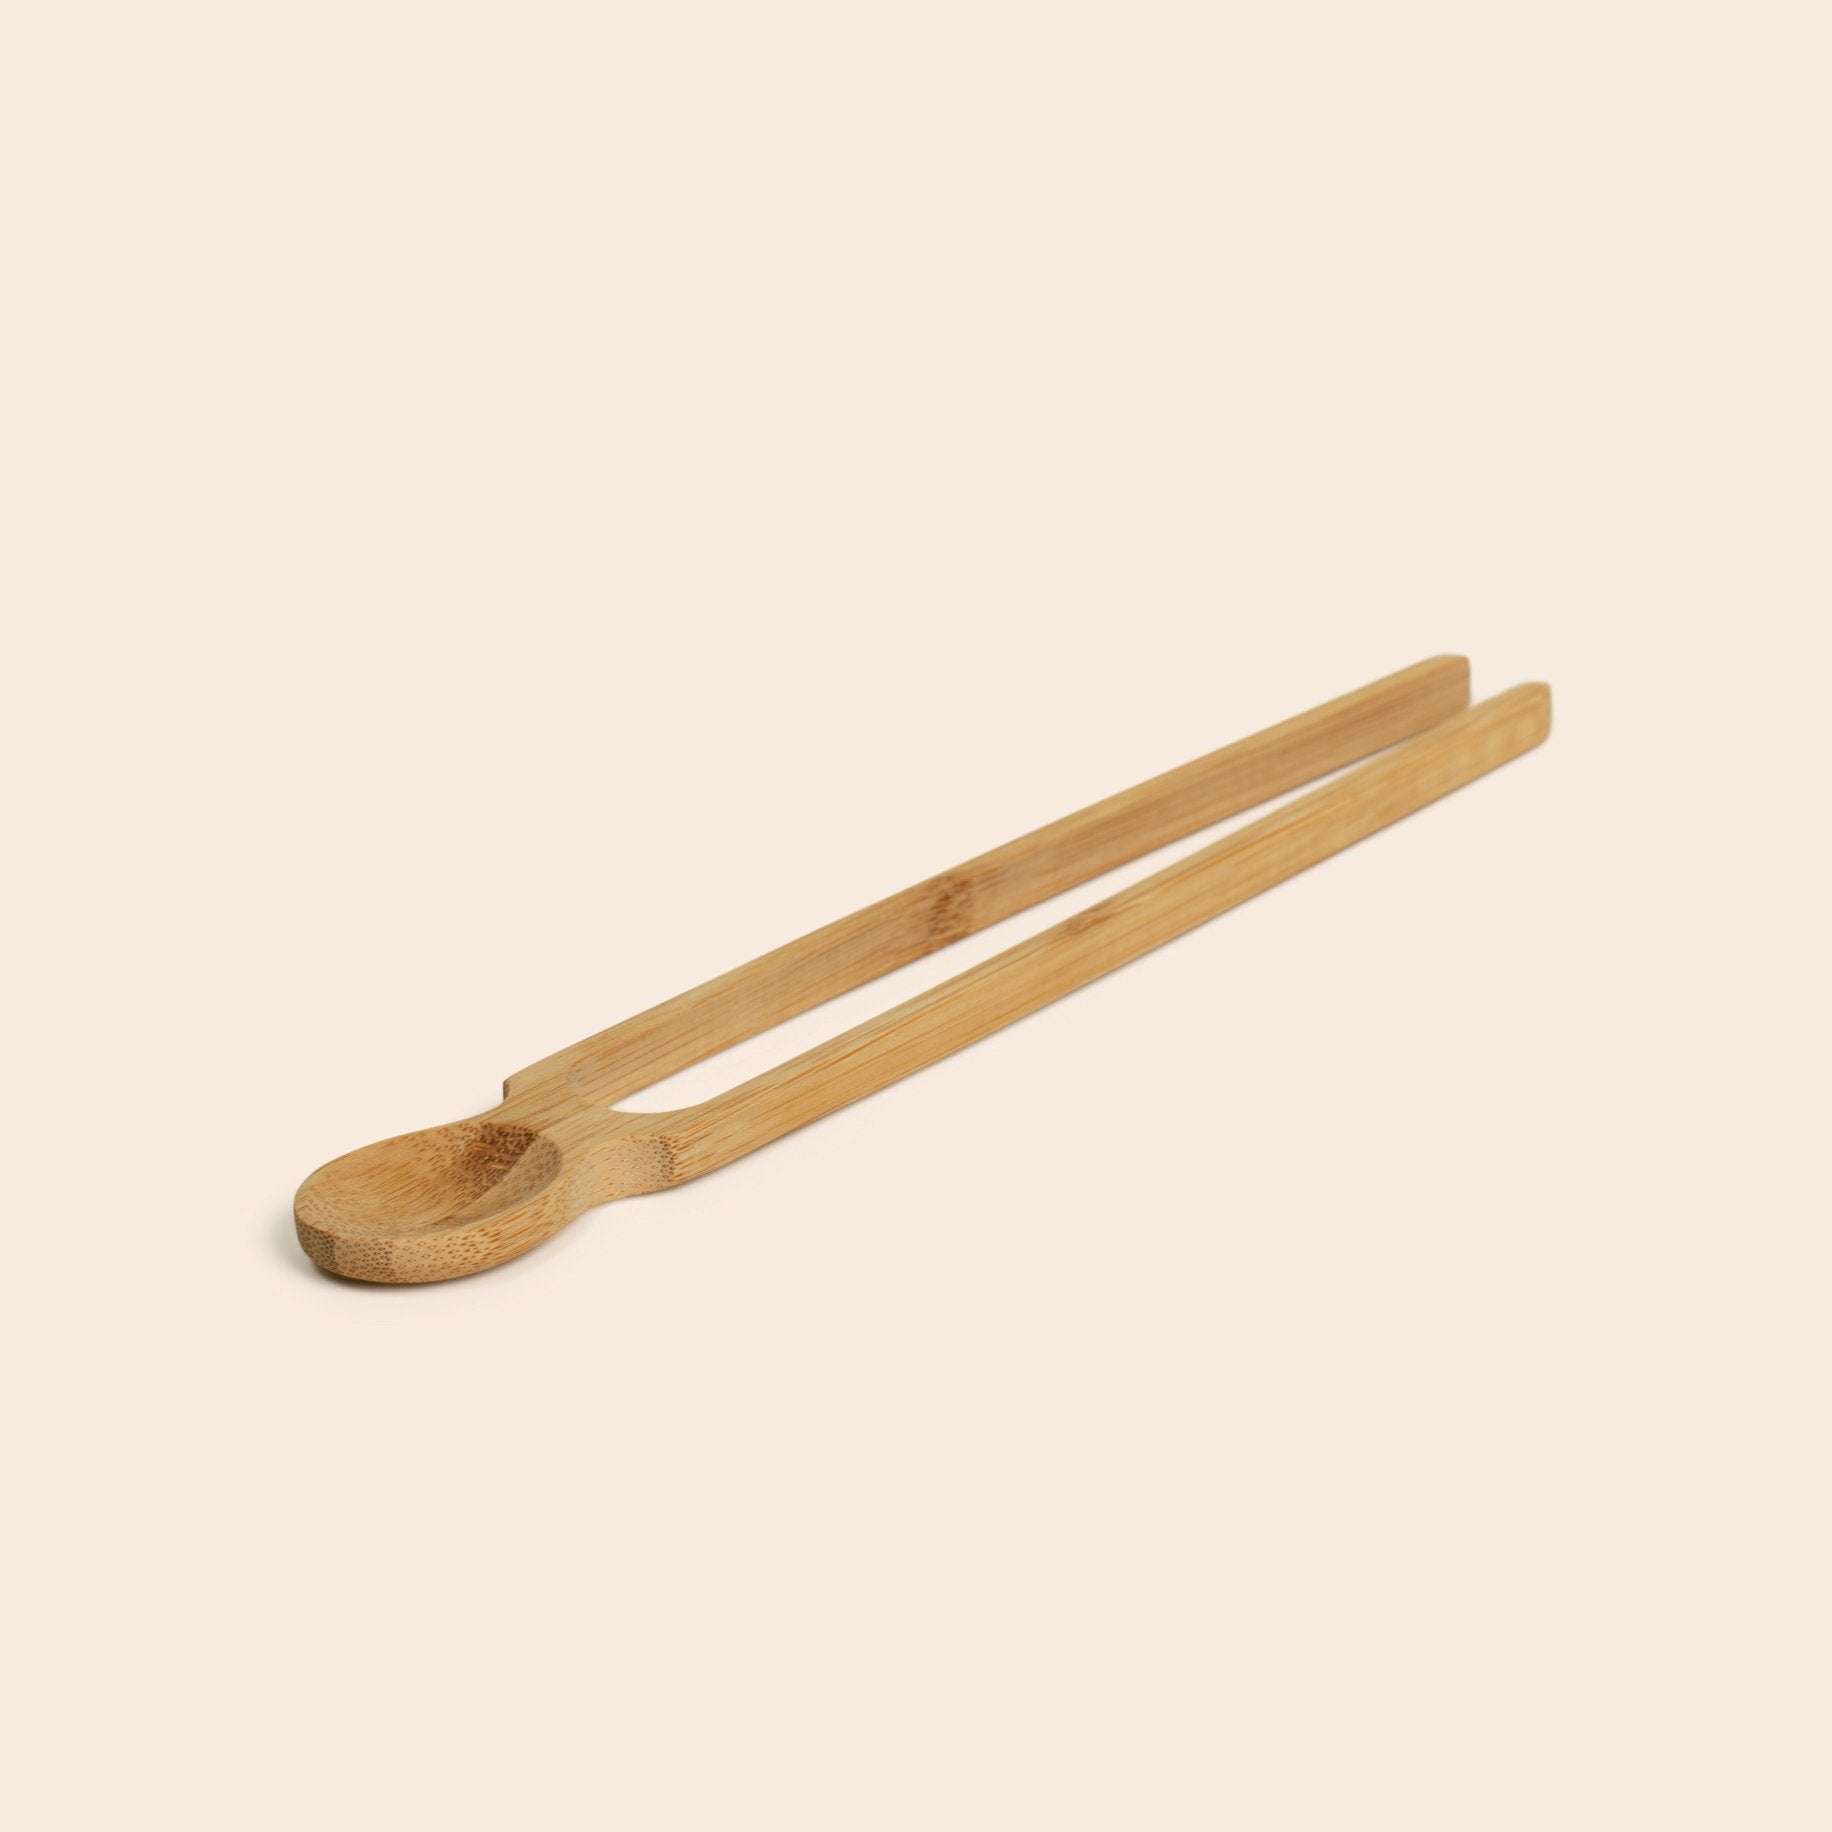 sustainable, zero waste, earth-friendly, plastic-free Bamboo Chopstick Trainer - Bamboo Switch